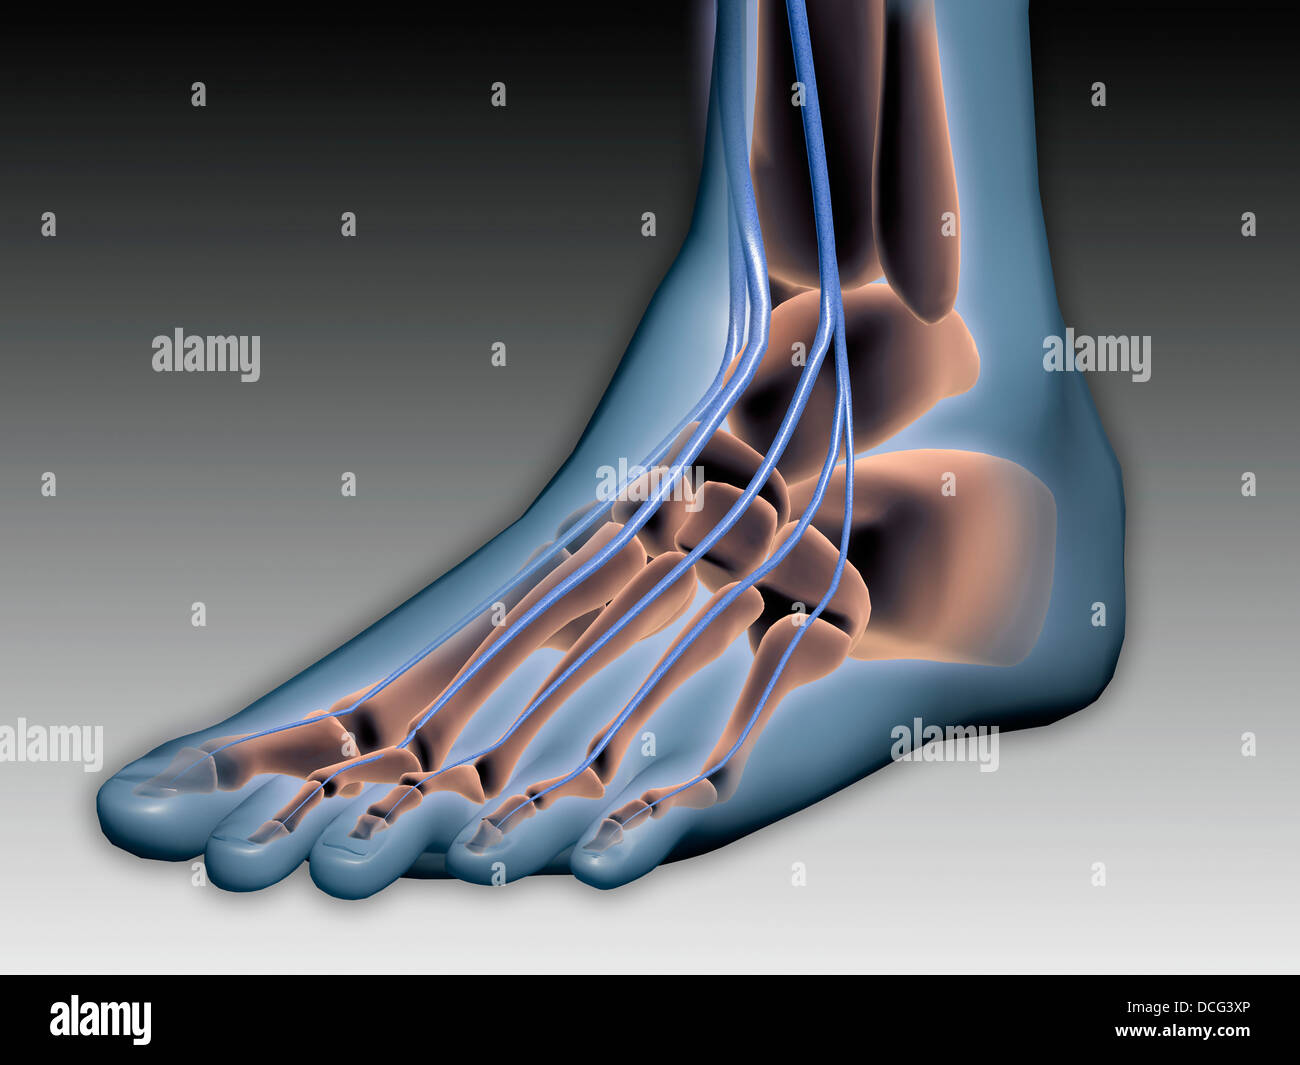 Conceptual image of human foot with nervous system. Stock Photo